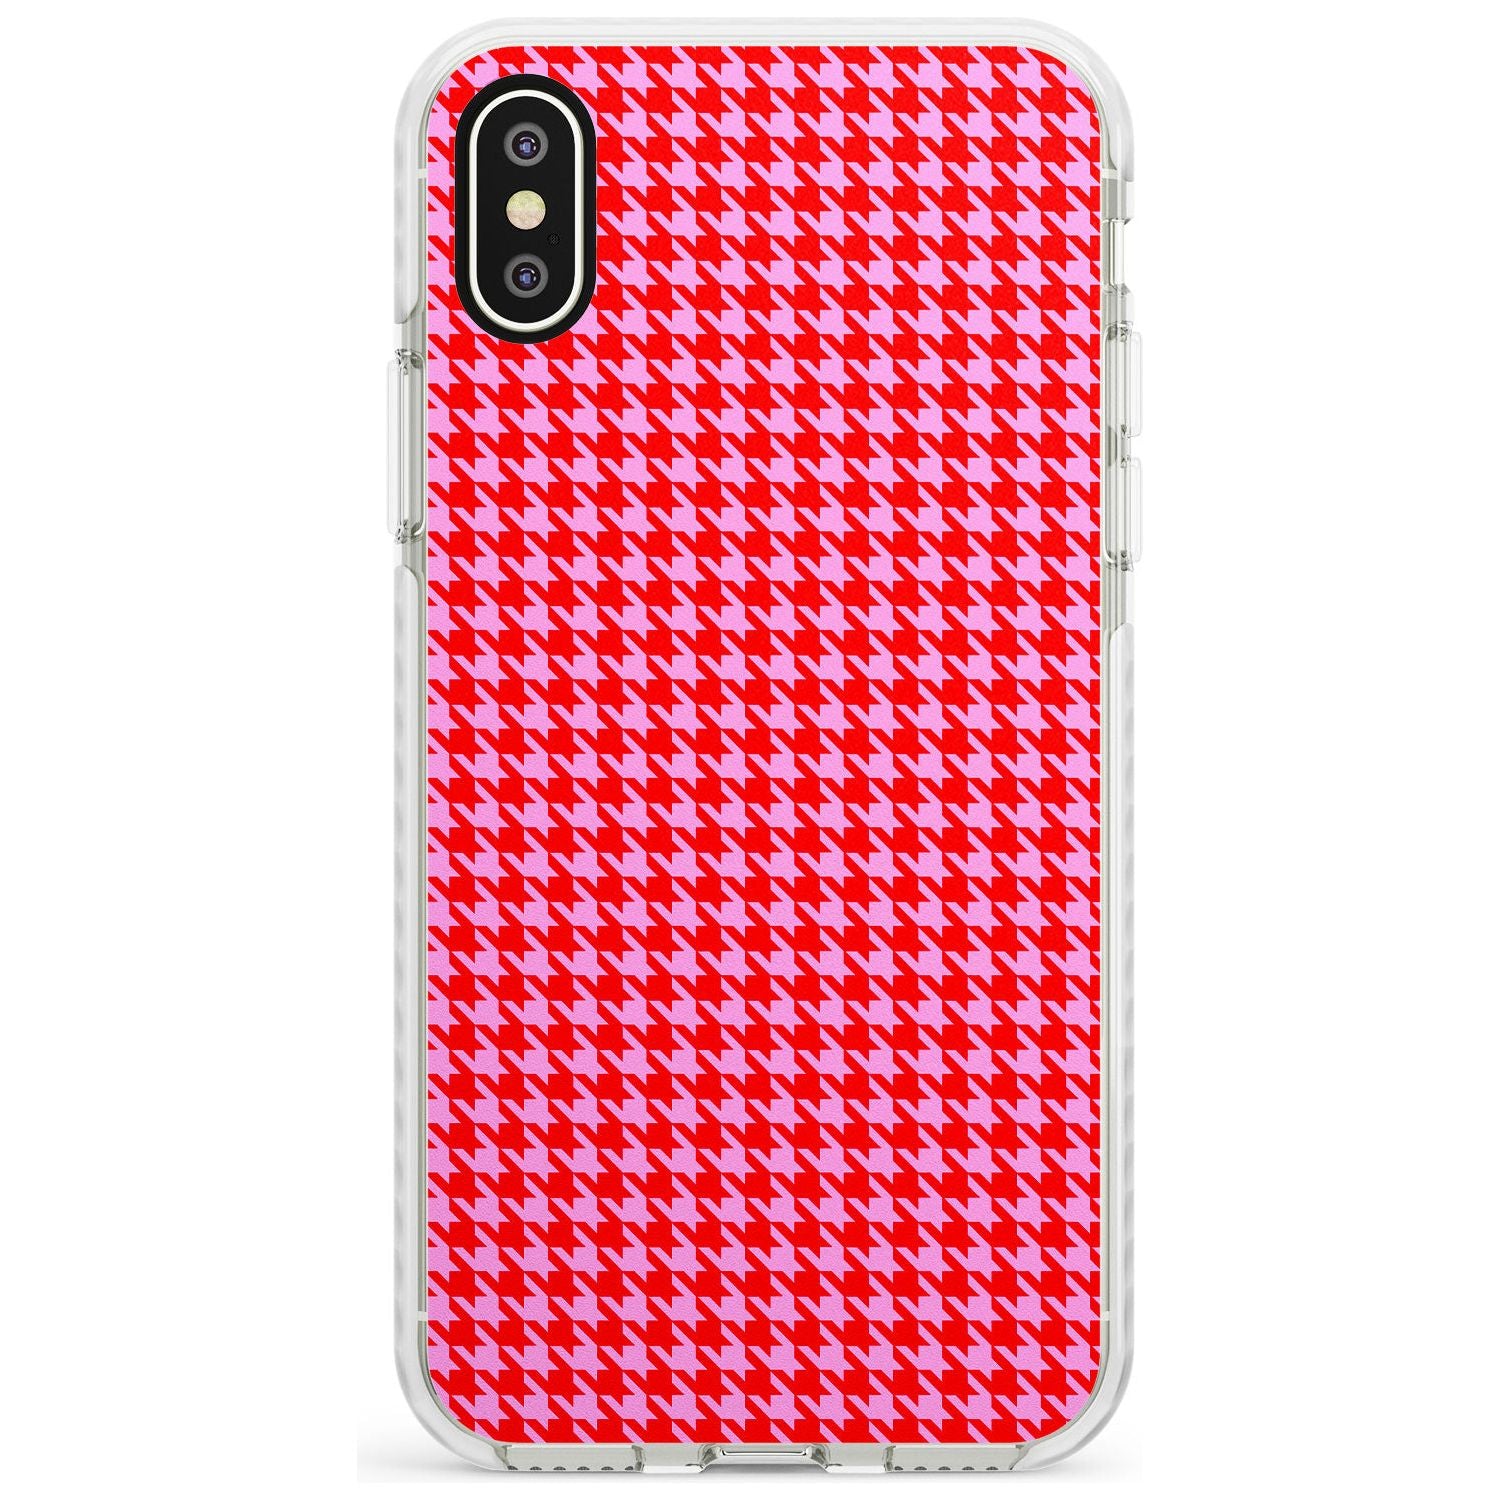 Neon Pink & Red Houndstooth Pattern Impact Phone Case for iPhone X XS Max XR